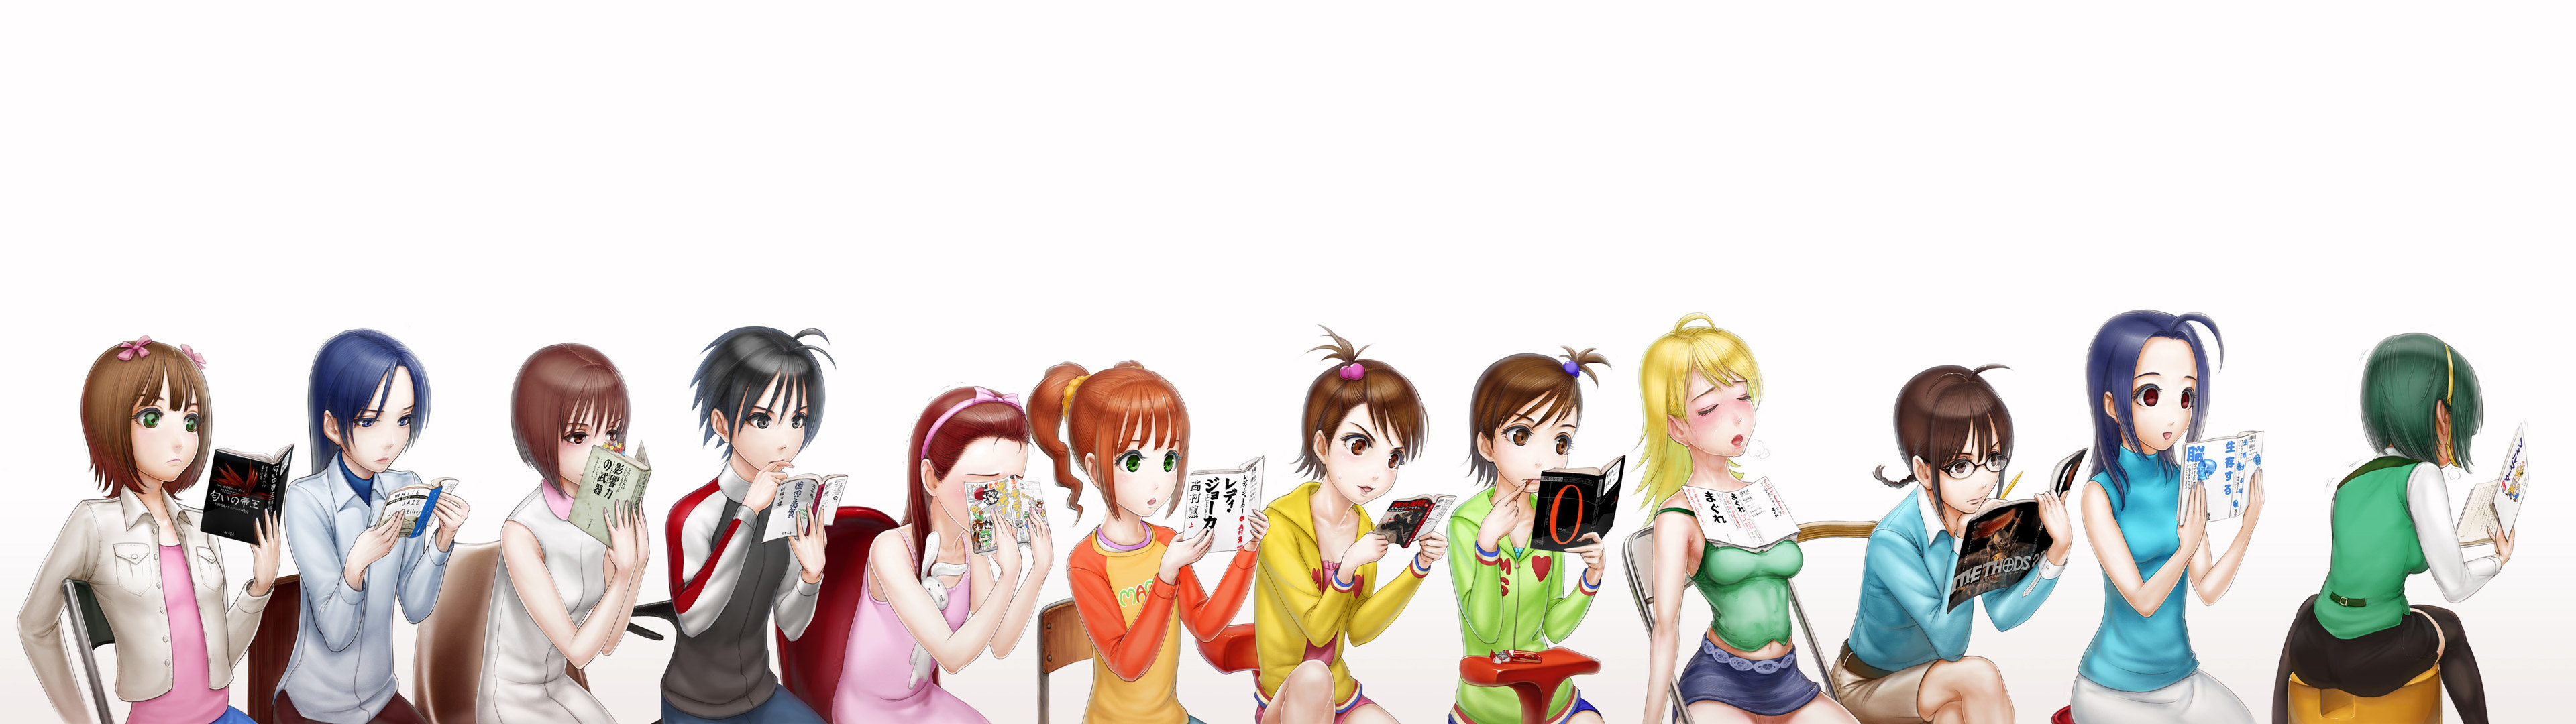 Download dual monitor 3840x1080 IDOLM@STER PC background ID:82712 for free